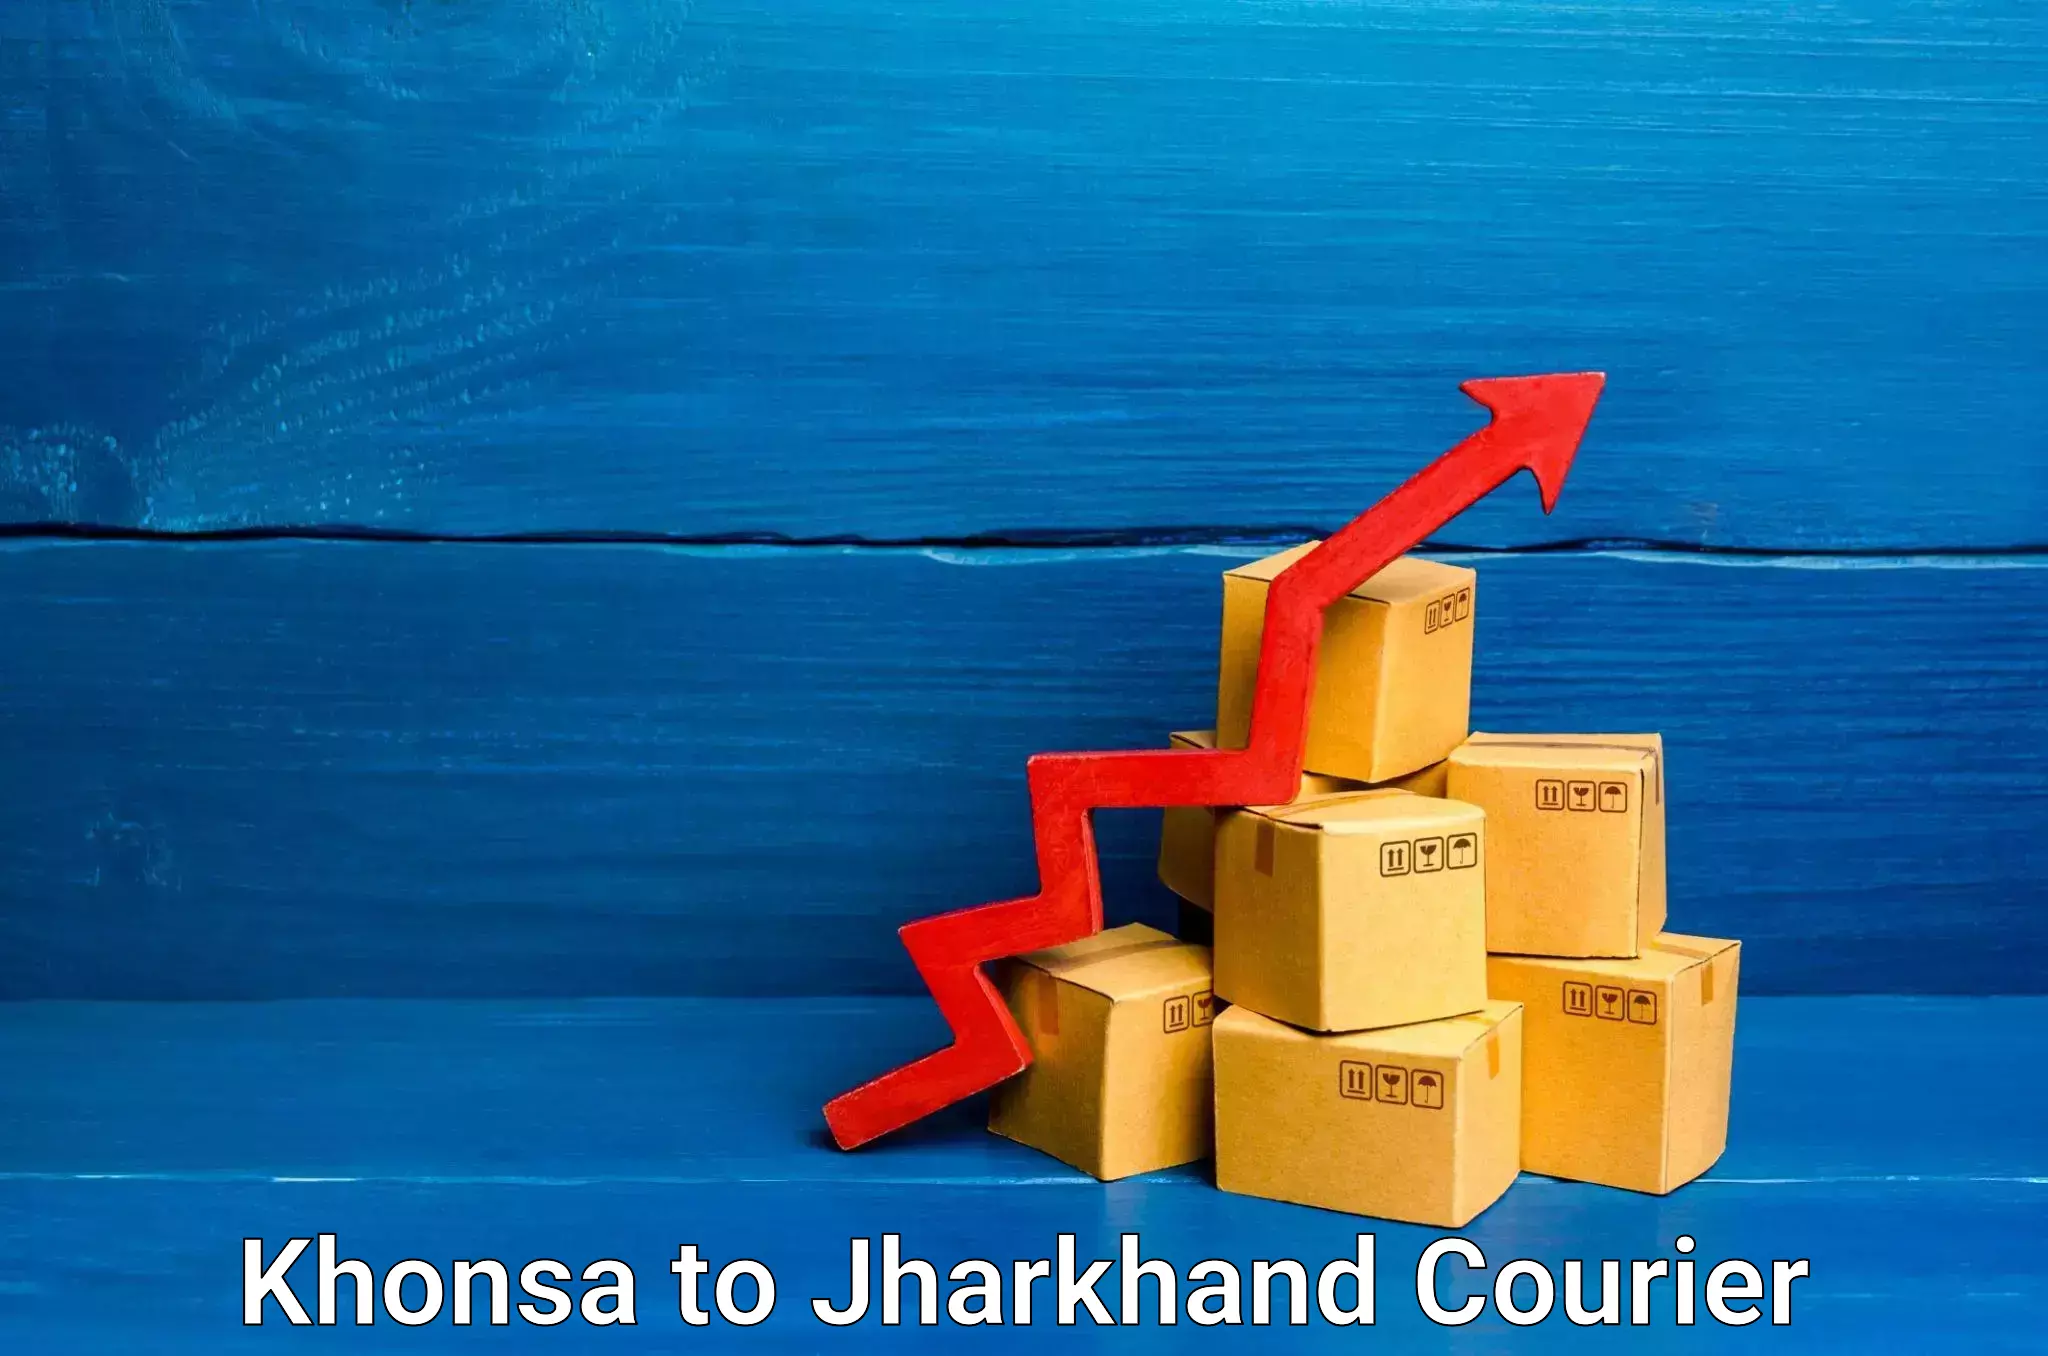 Local delivery service Khonsa to Jharkhand